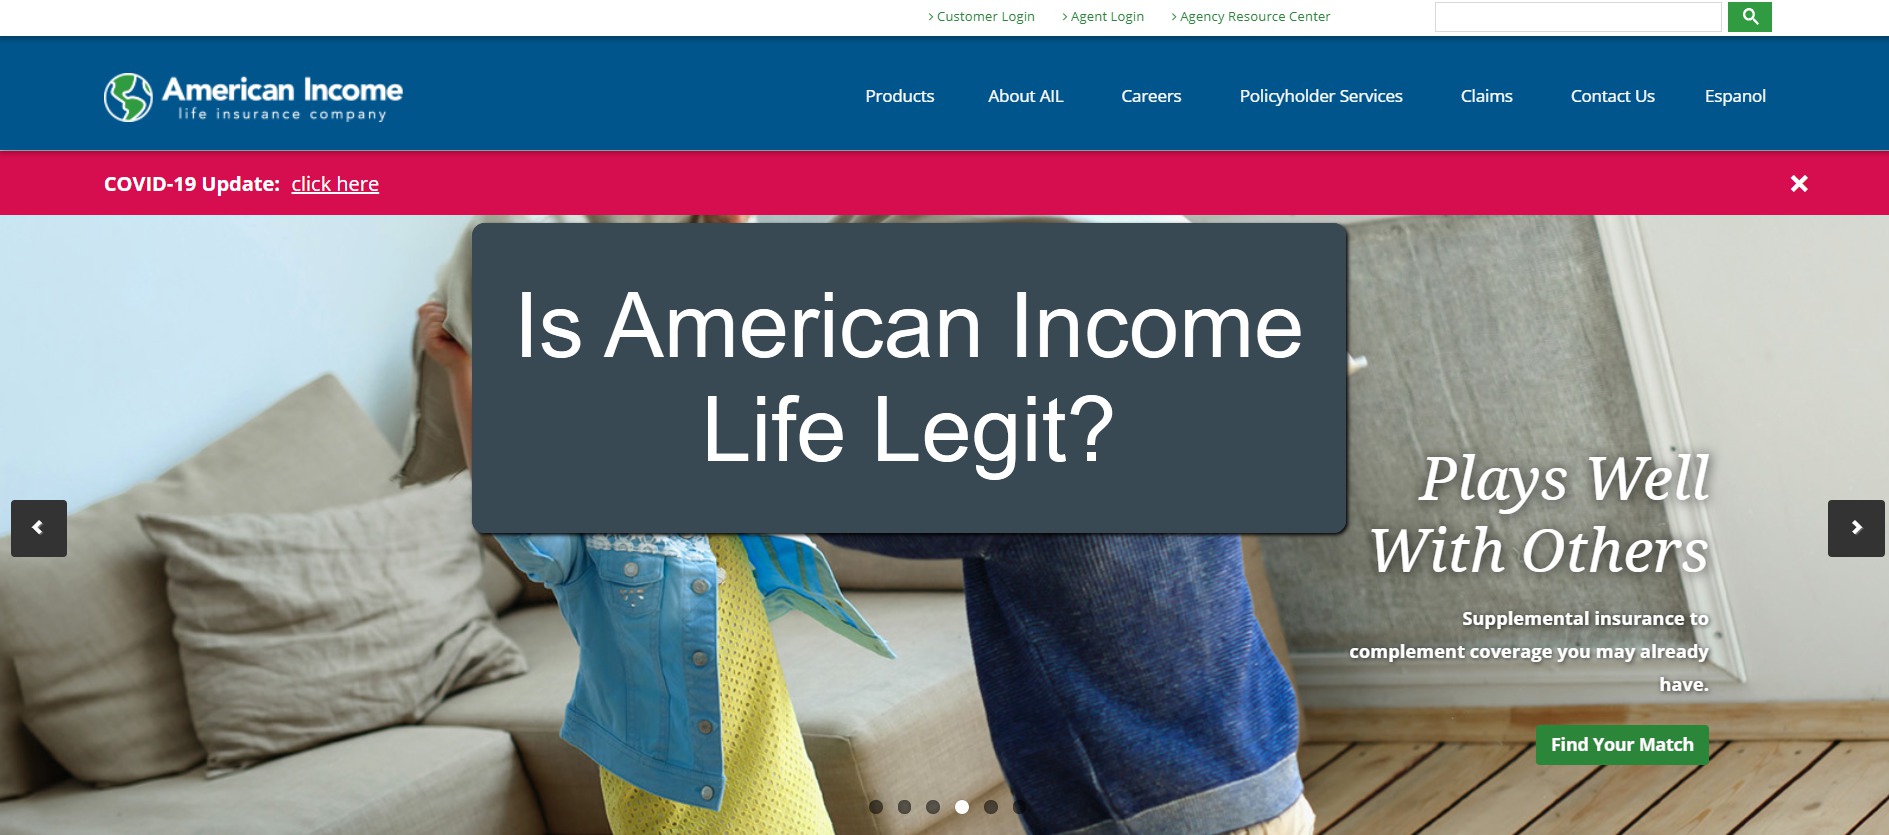 American income life insurance job offer